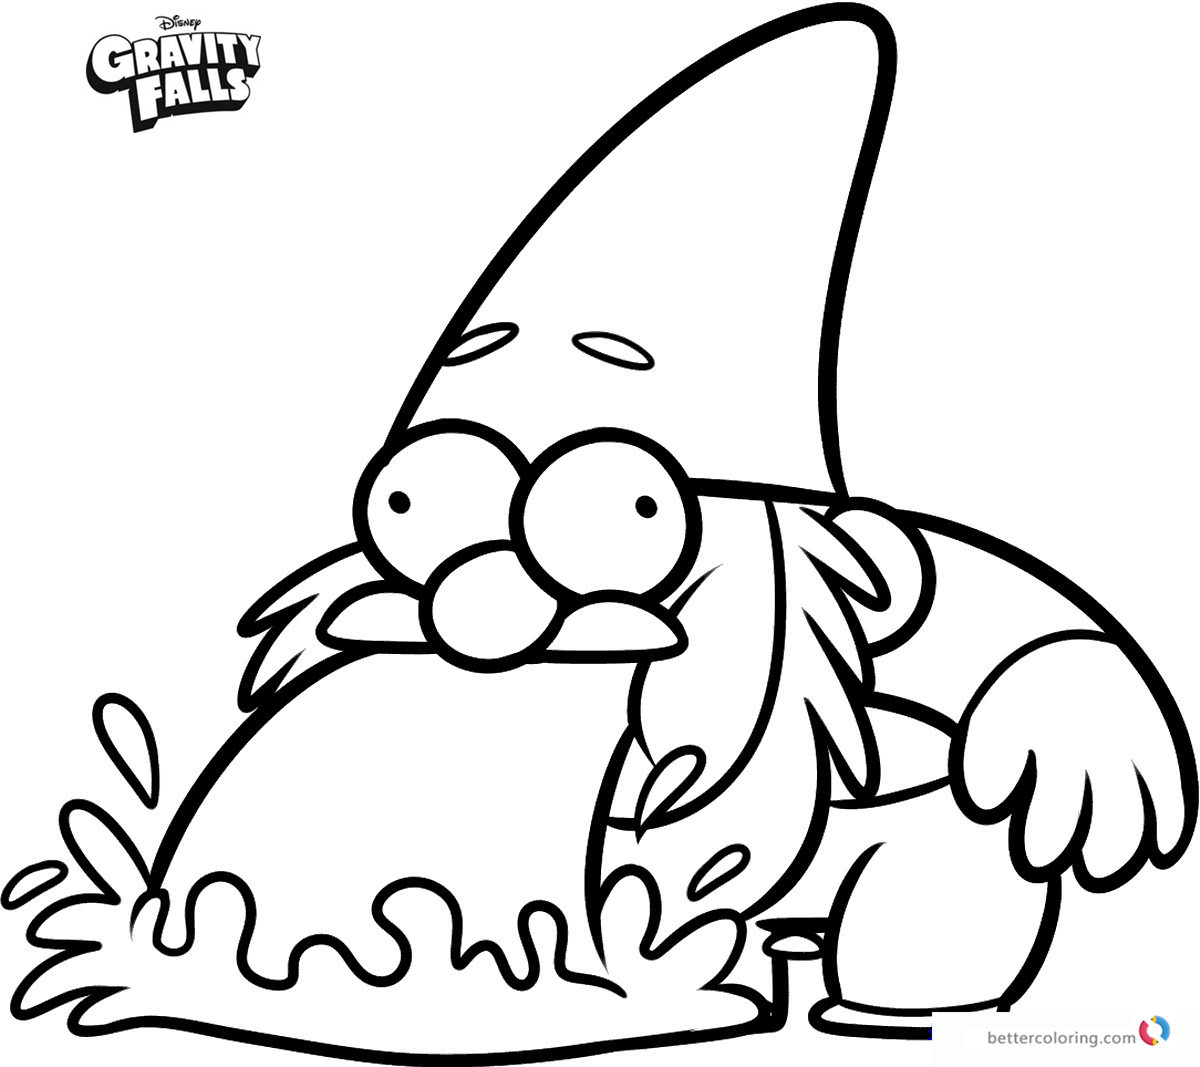 Gravity falls coloring pages Gnomes printable